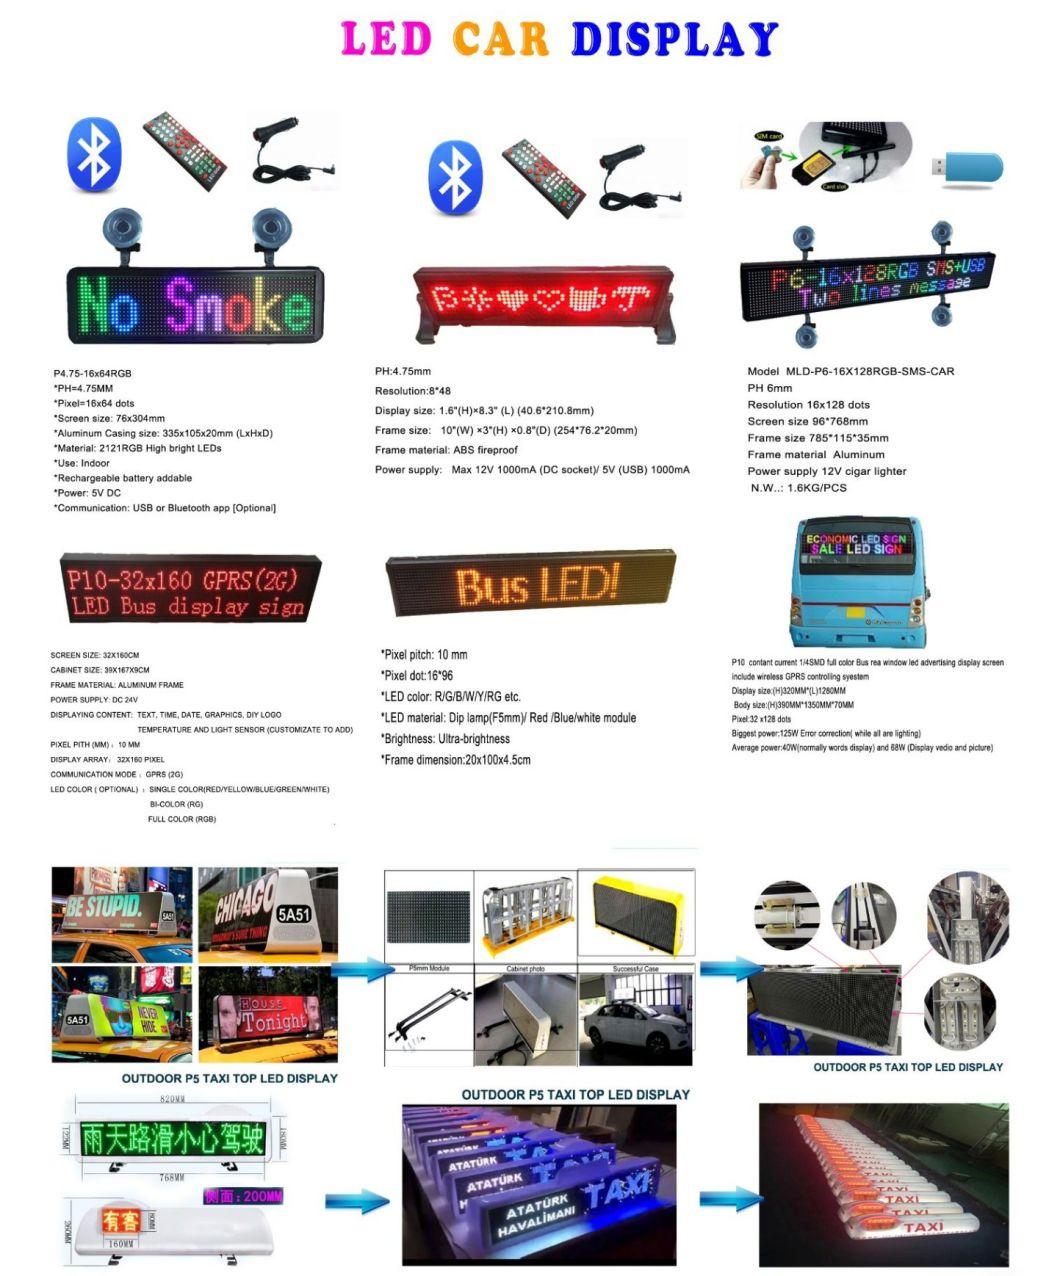 Specializing in The Production of Indoor and Outdoor LED Display Panel